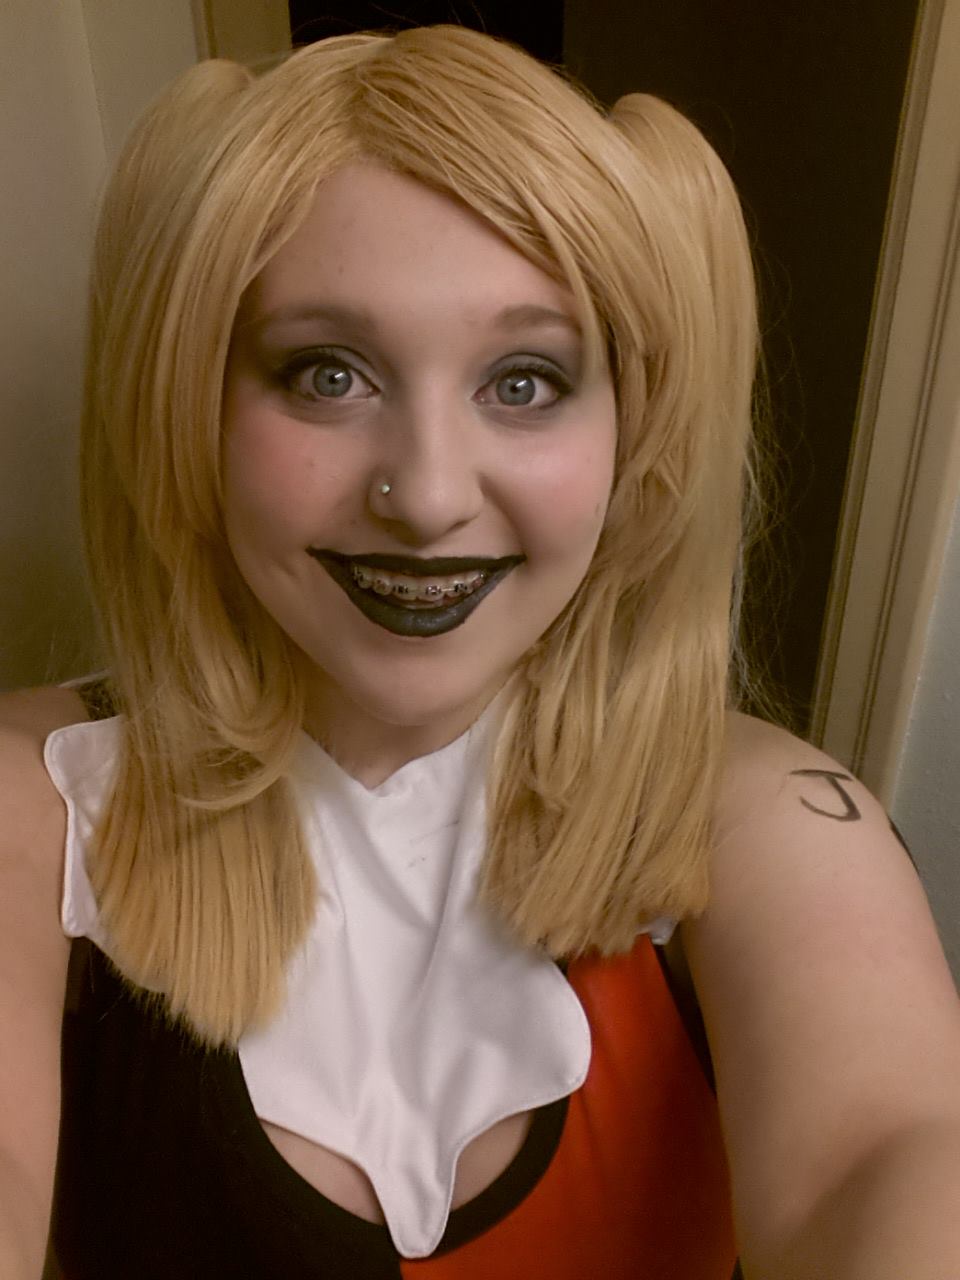 Casual Harley Quinn Cosplay 8 by JilliePope on DeviantArt